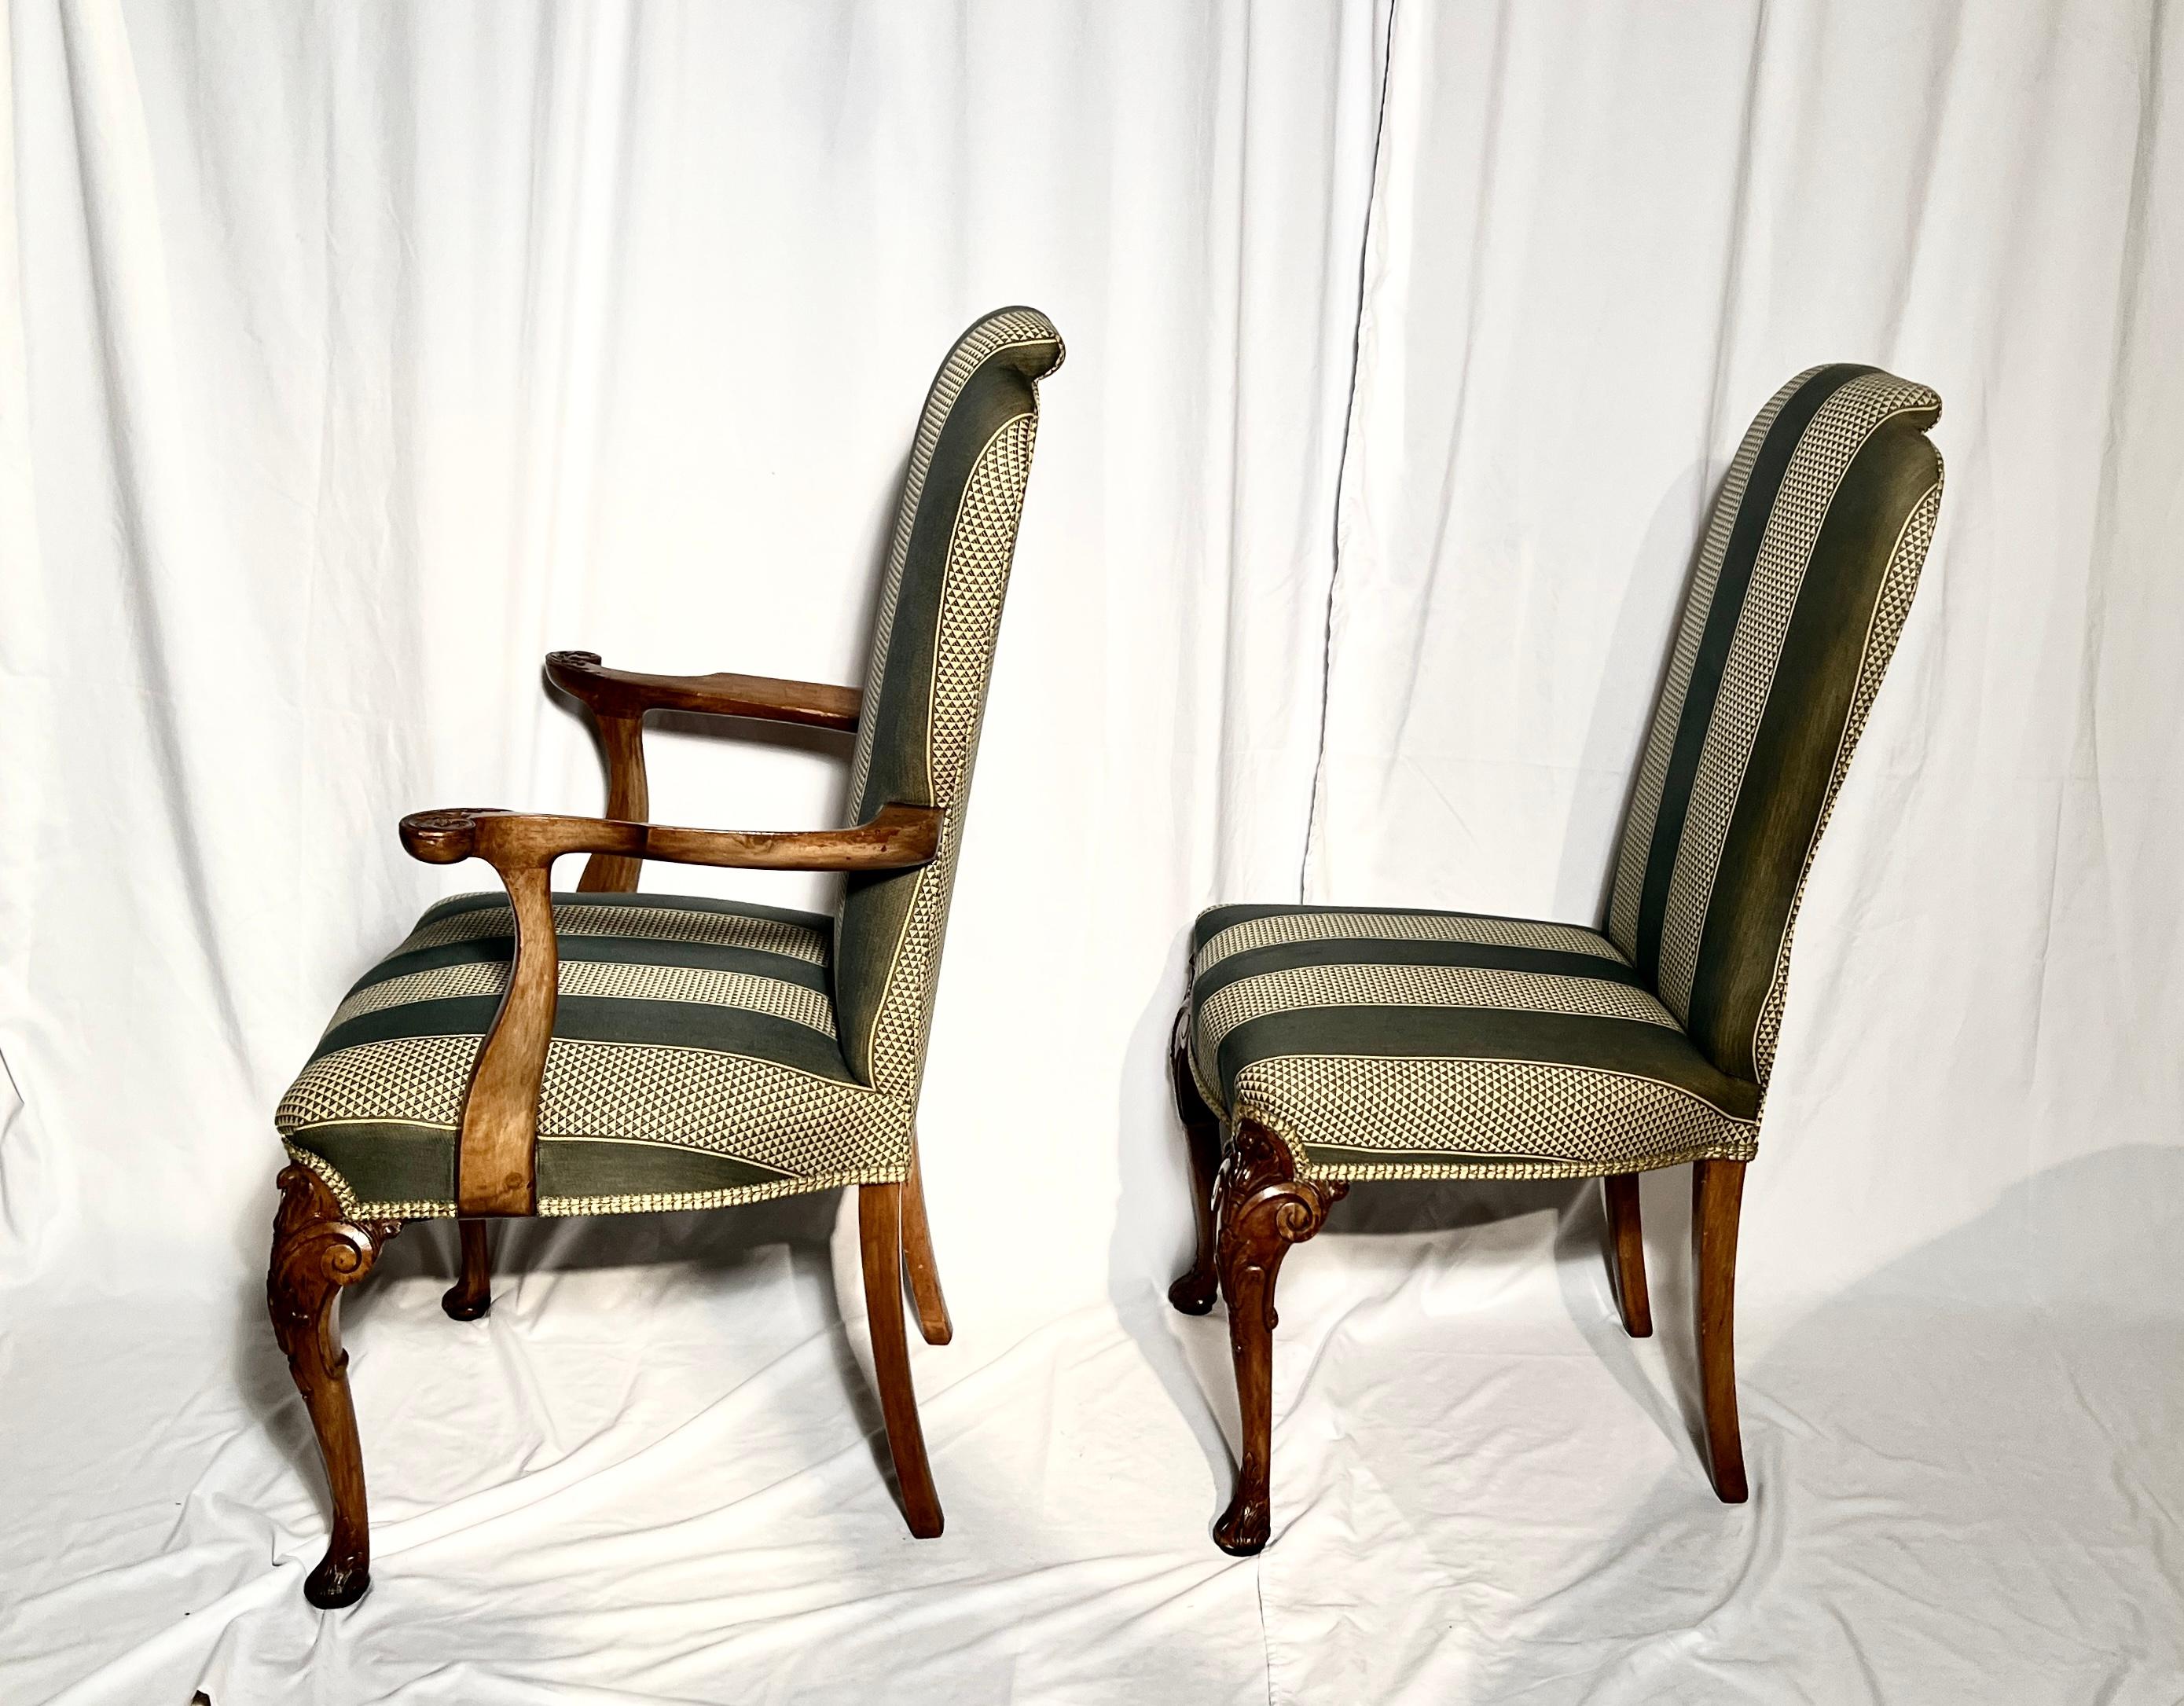 Set of 8 Antique English Carved Walnut Dining Chairs, Circa 1900.  
Arm Chair:  Height: 42.5